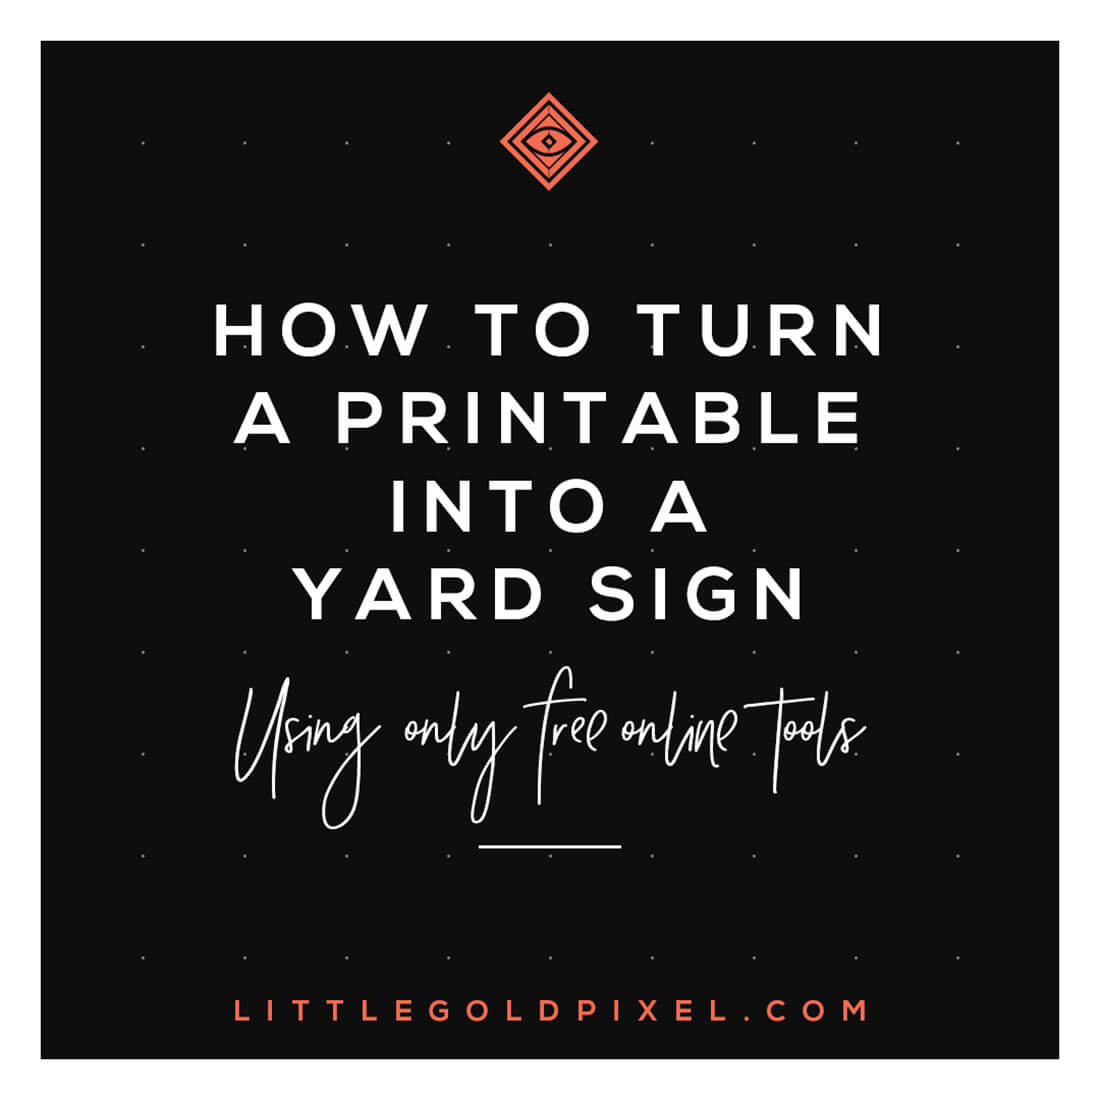 How to Turn a Printable into a Yard Sign • Little Gold Pixel